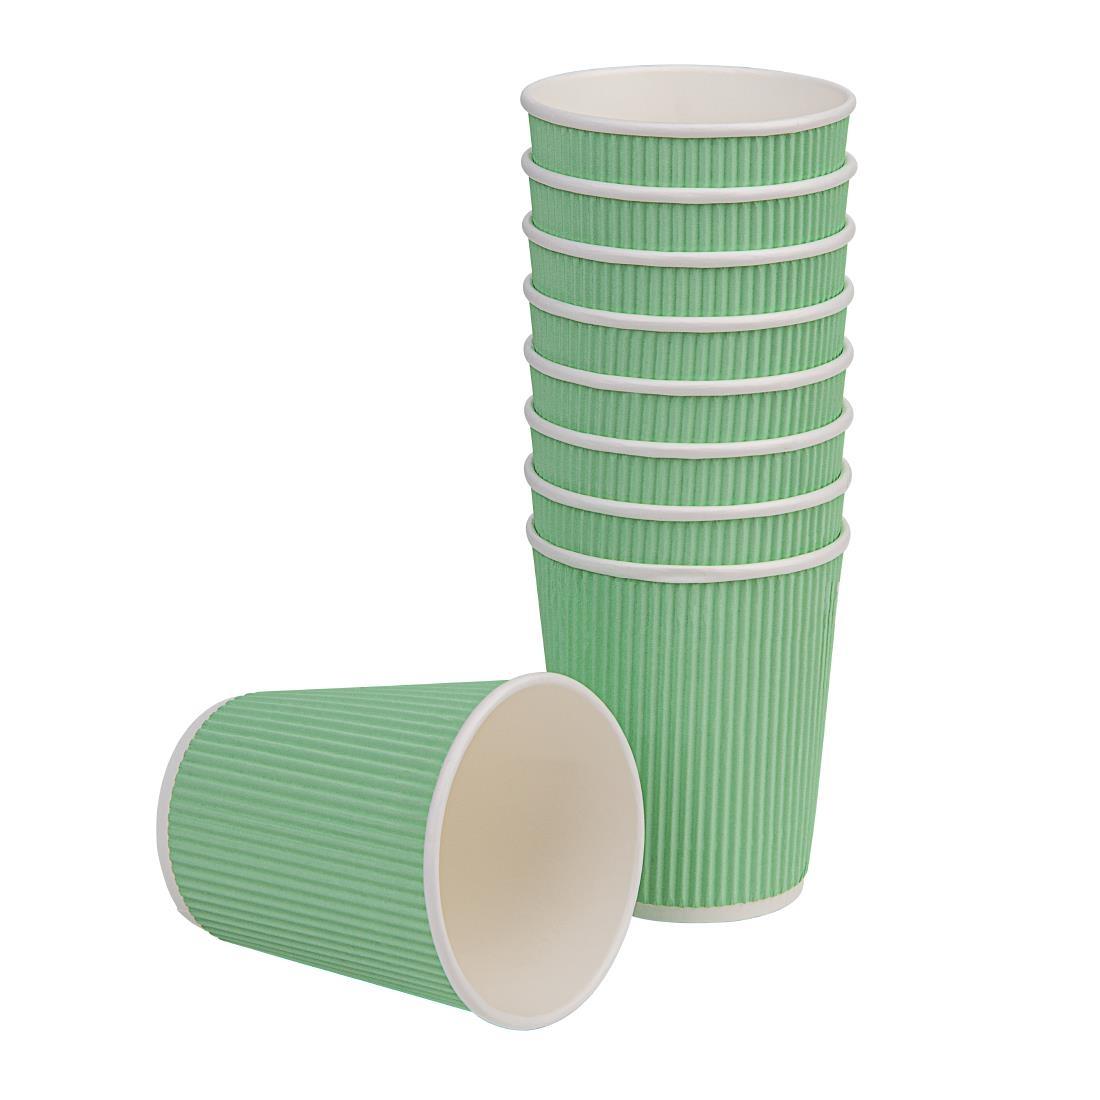 Fiesta Recyclable Coffee Cups Ripple Wall Turquoise 225ml / 8oz (Pack of 500) - GP421  - 2